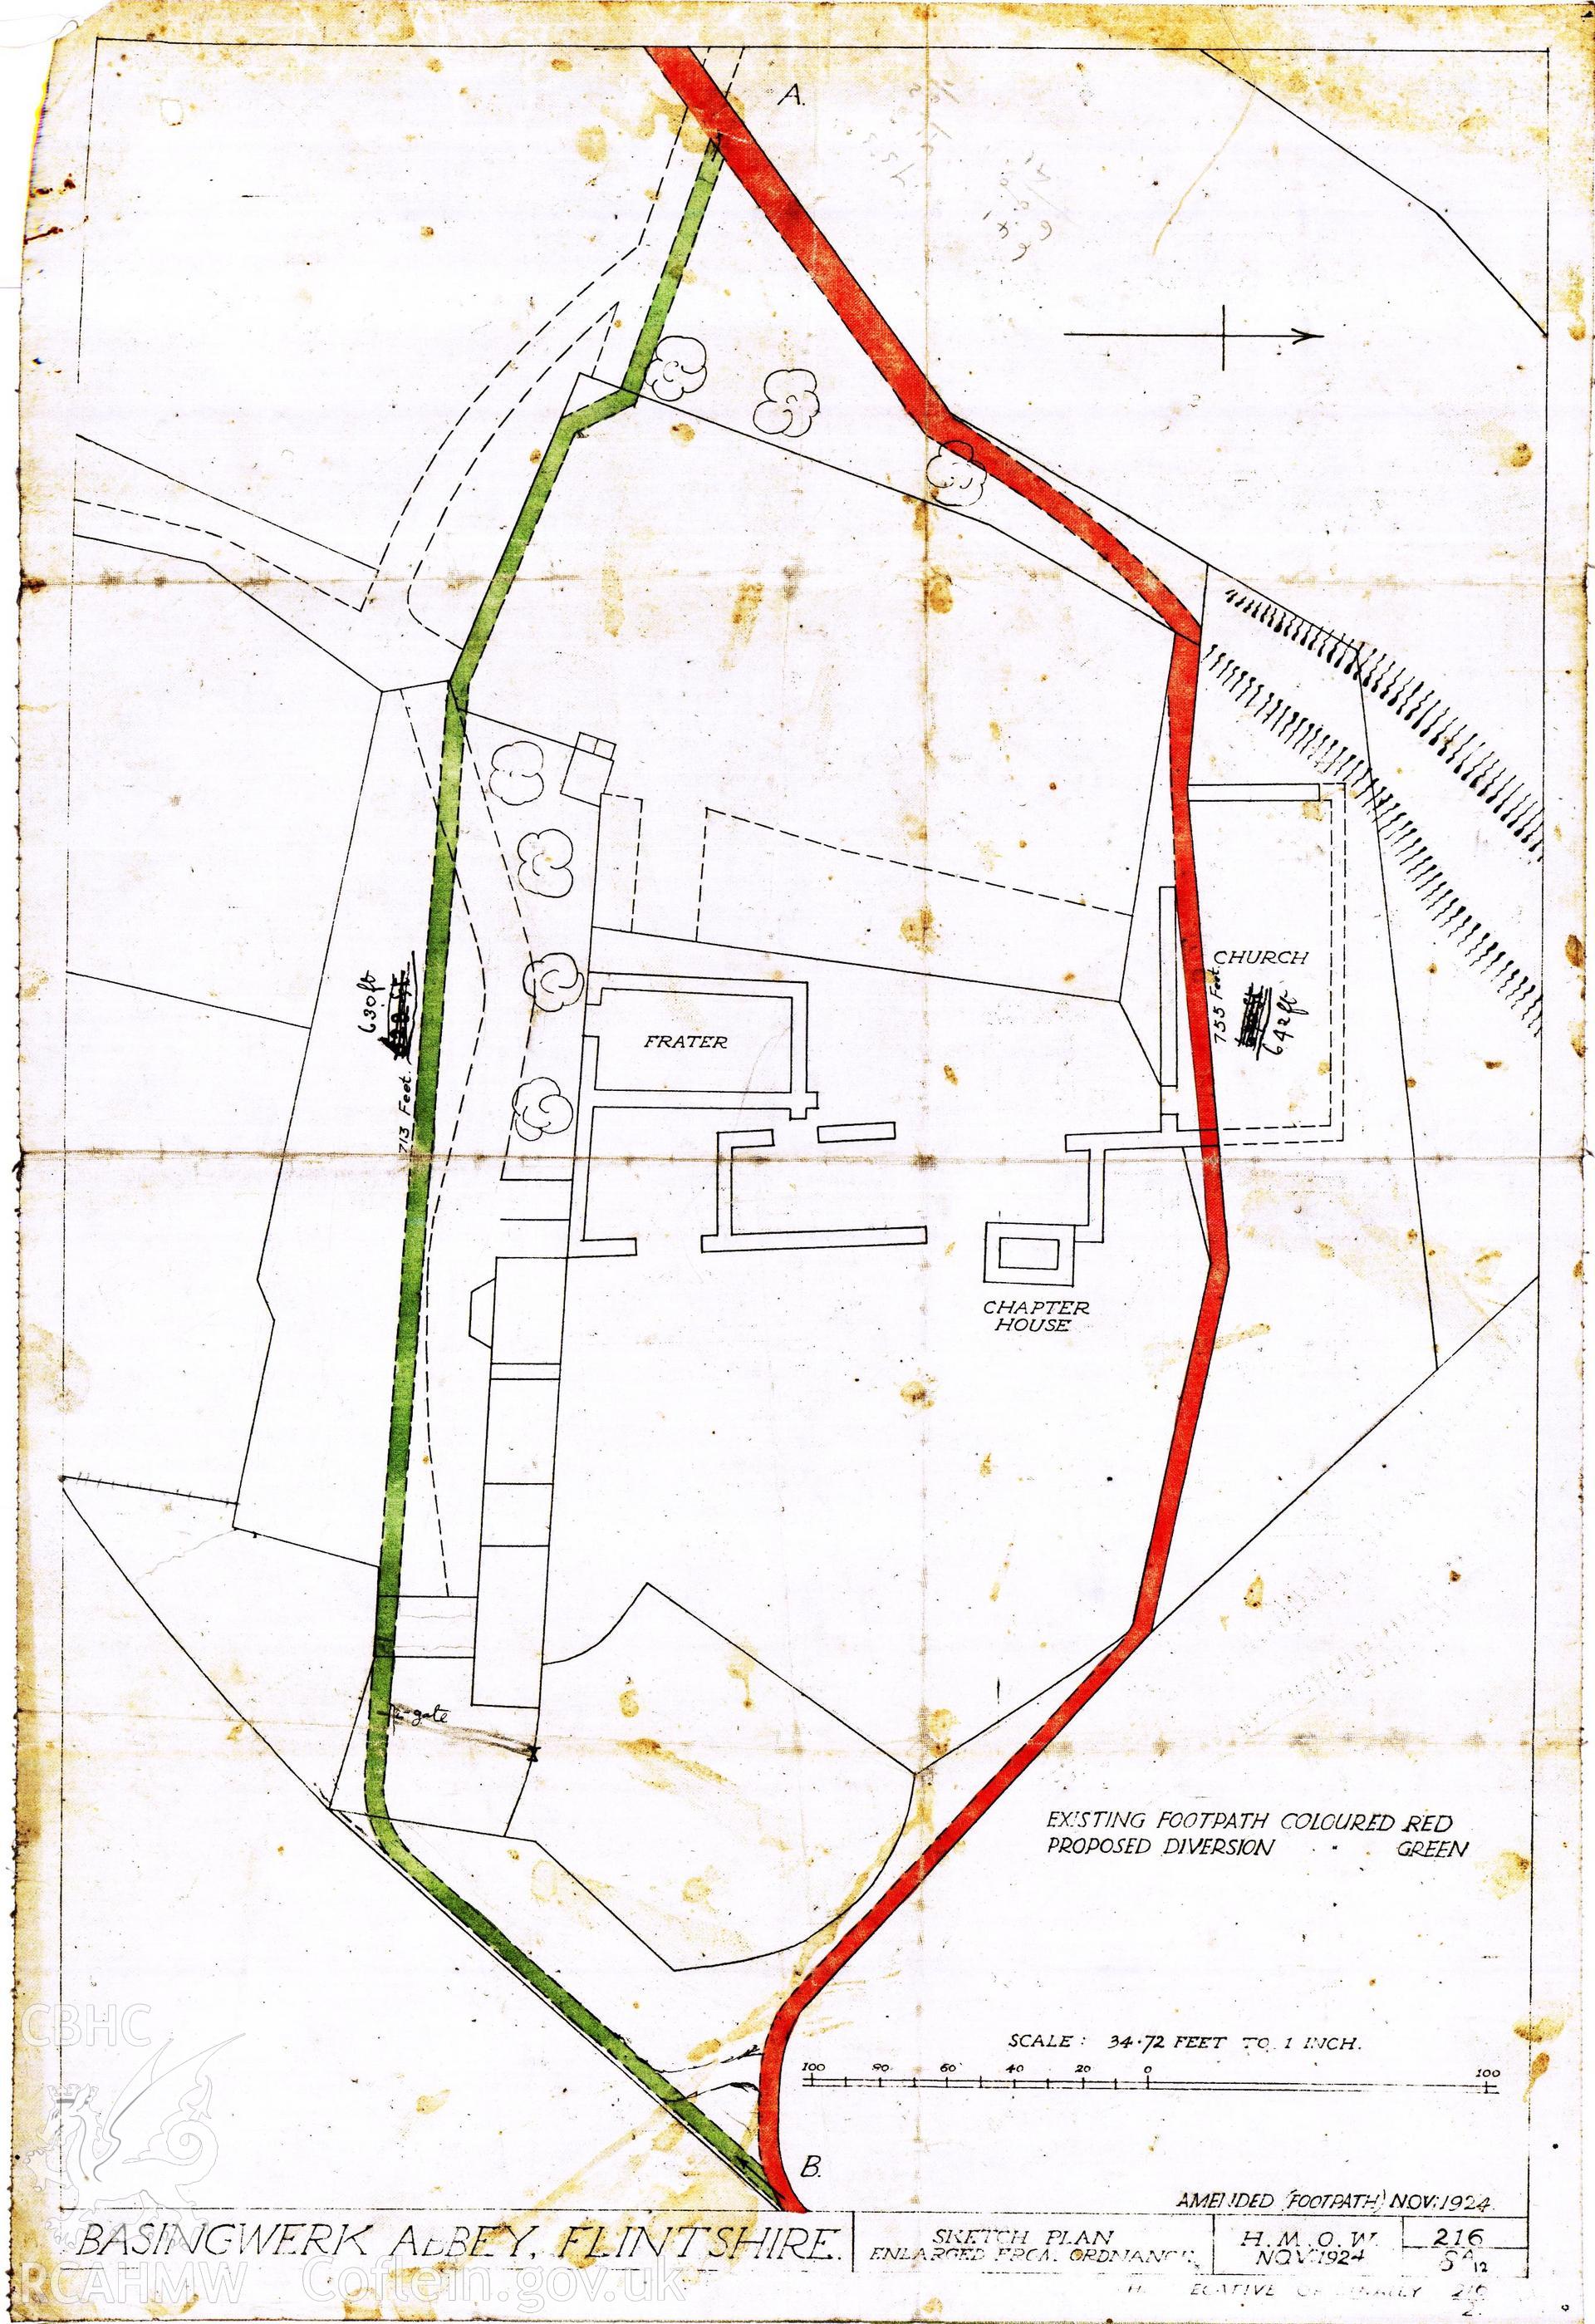 Cadw guardianship monument drawing of Basingwerk. Deed Plan showing footpaths. Cadw Ref. No:216/8A12. No scale.